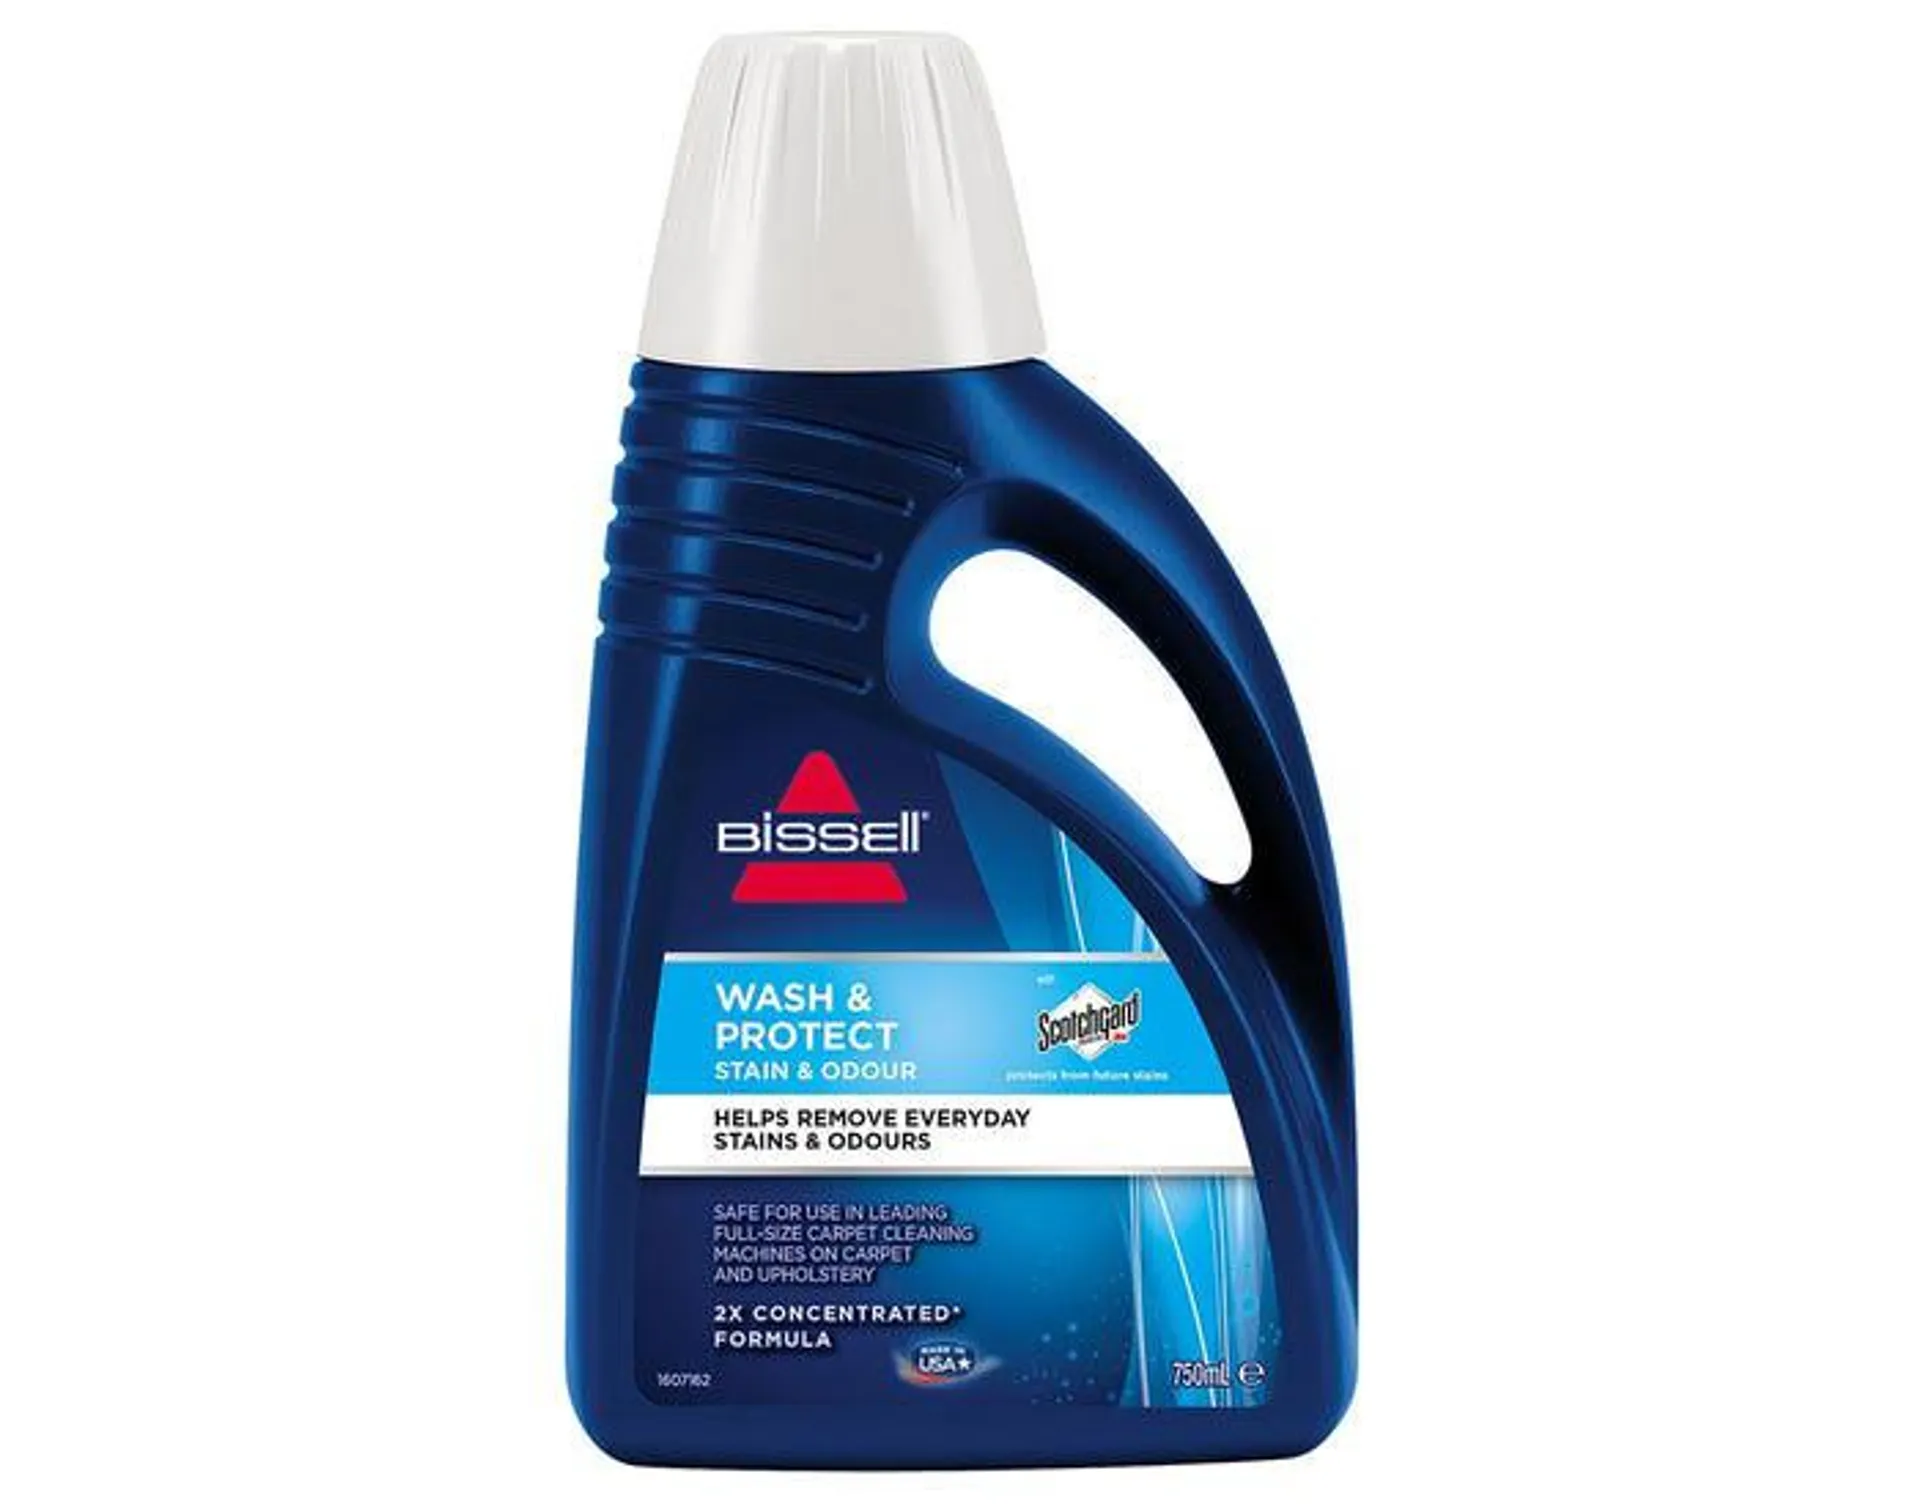 Bissell Wash & Protect Stain & Odour Formula 750ml